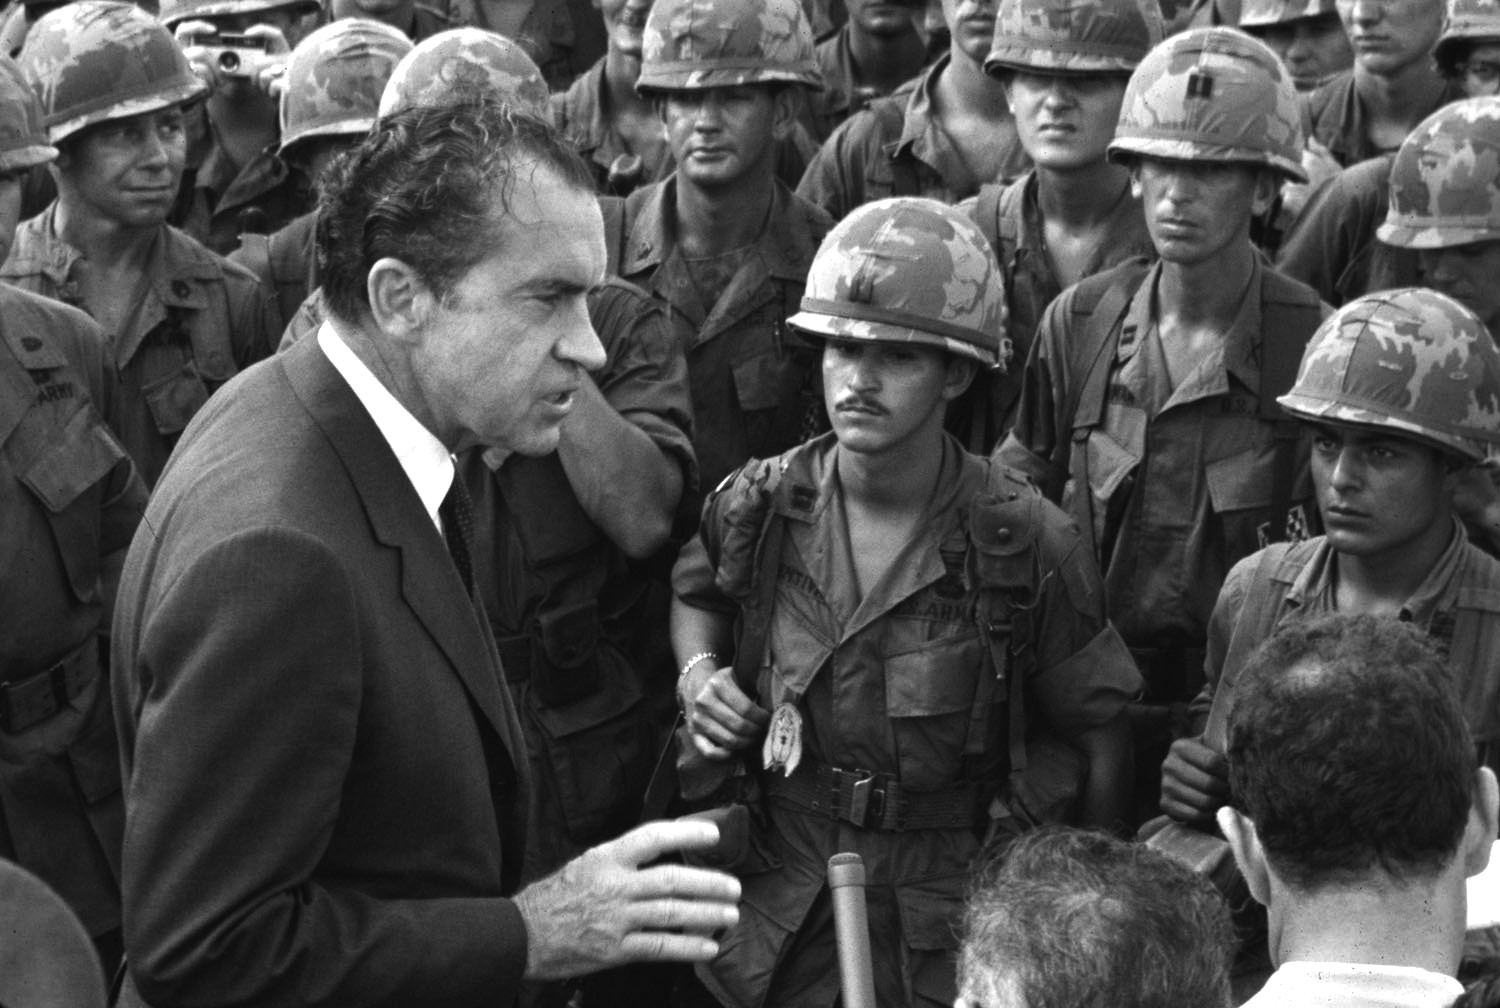 President Richard Nixon, shown with U.S. troops during the Vietnam War, became isolated politically in the White House during the Watergate crisis. He report- edly asked the Joint Chiefs of Staff whether military support was available to keep him in power.